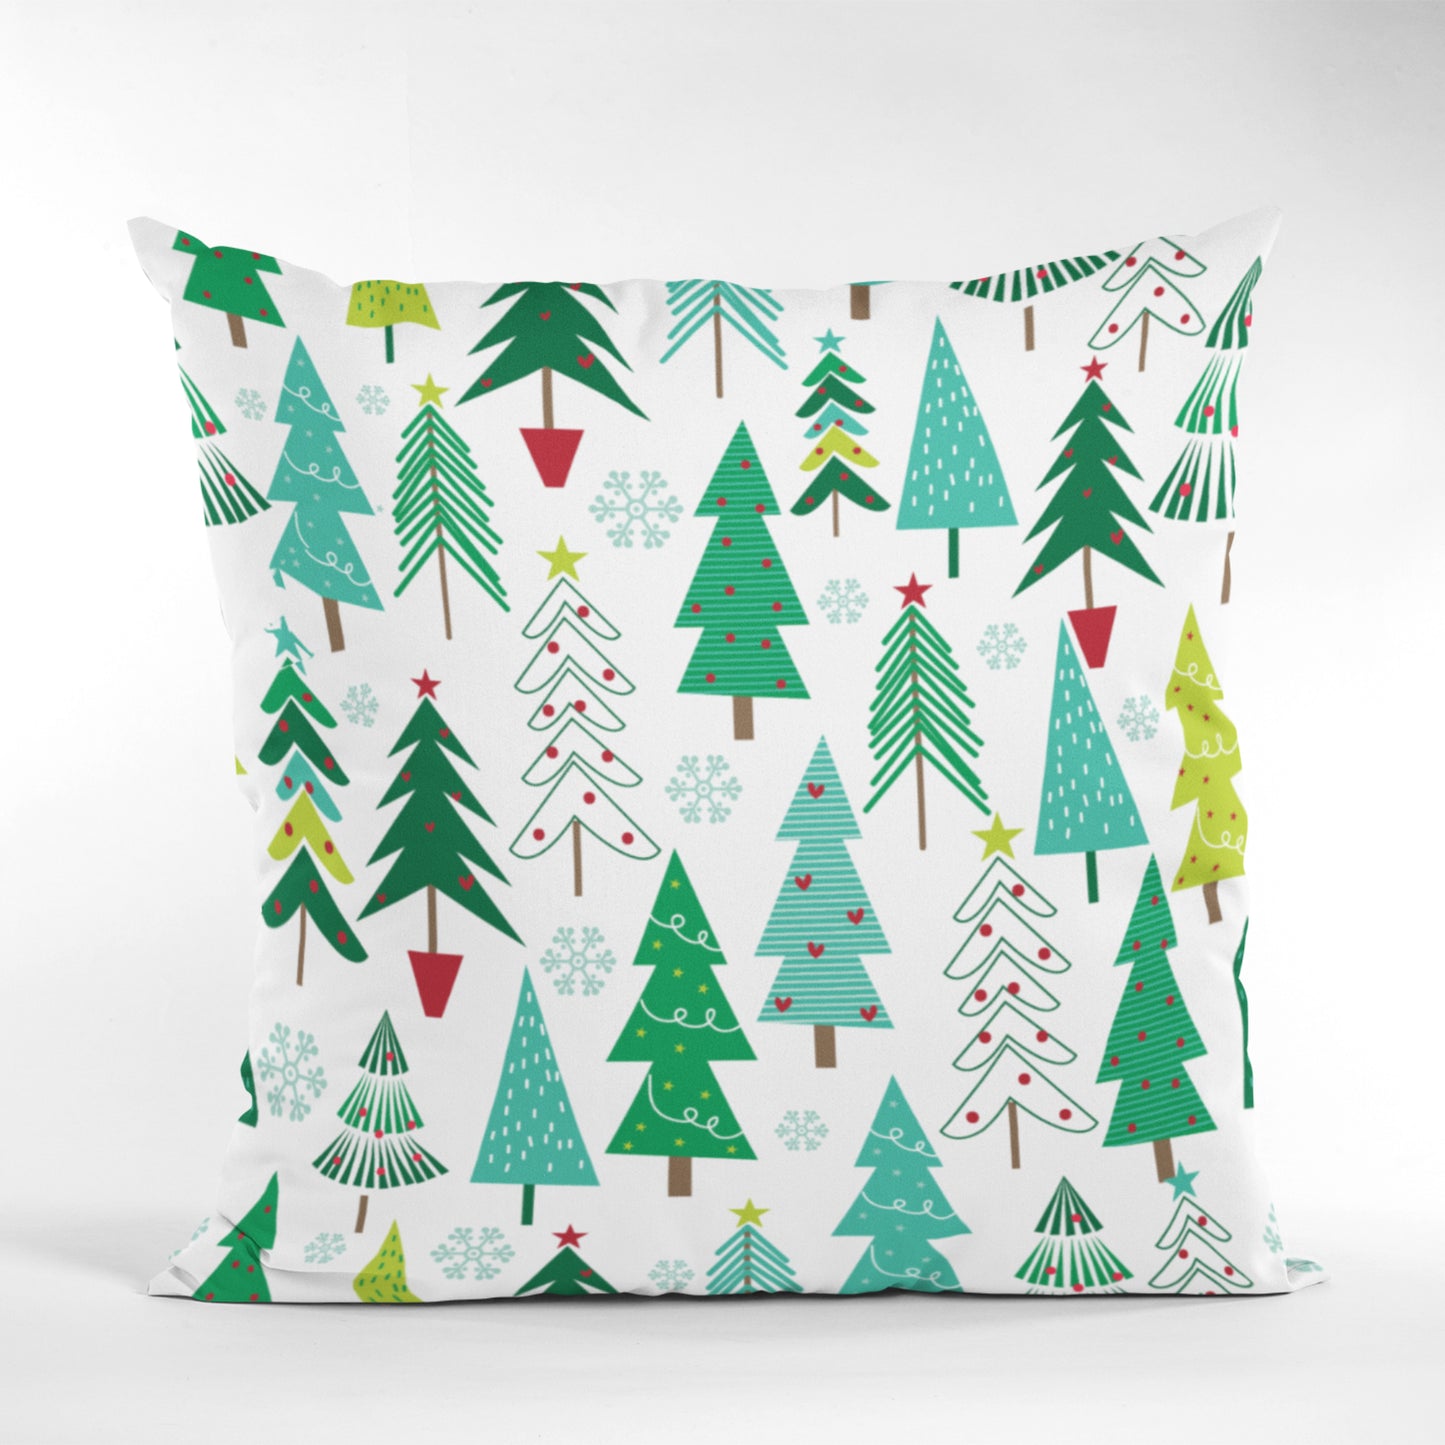 Festive Pillow with Christmas Pine Tree Design